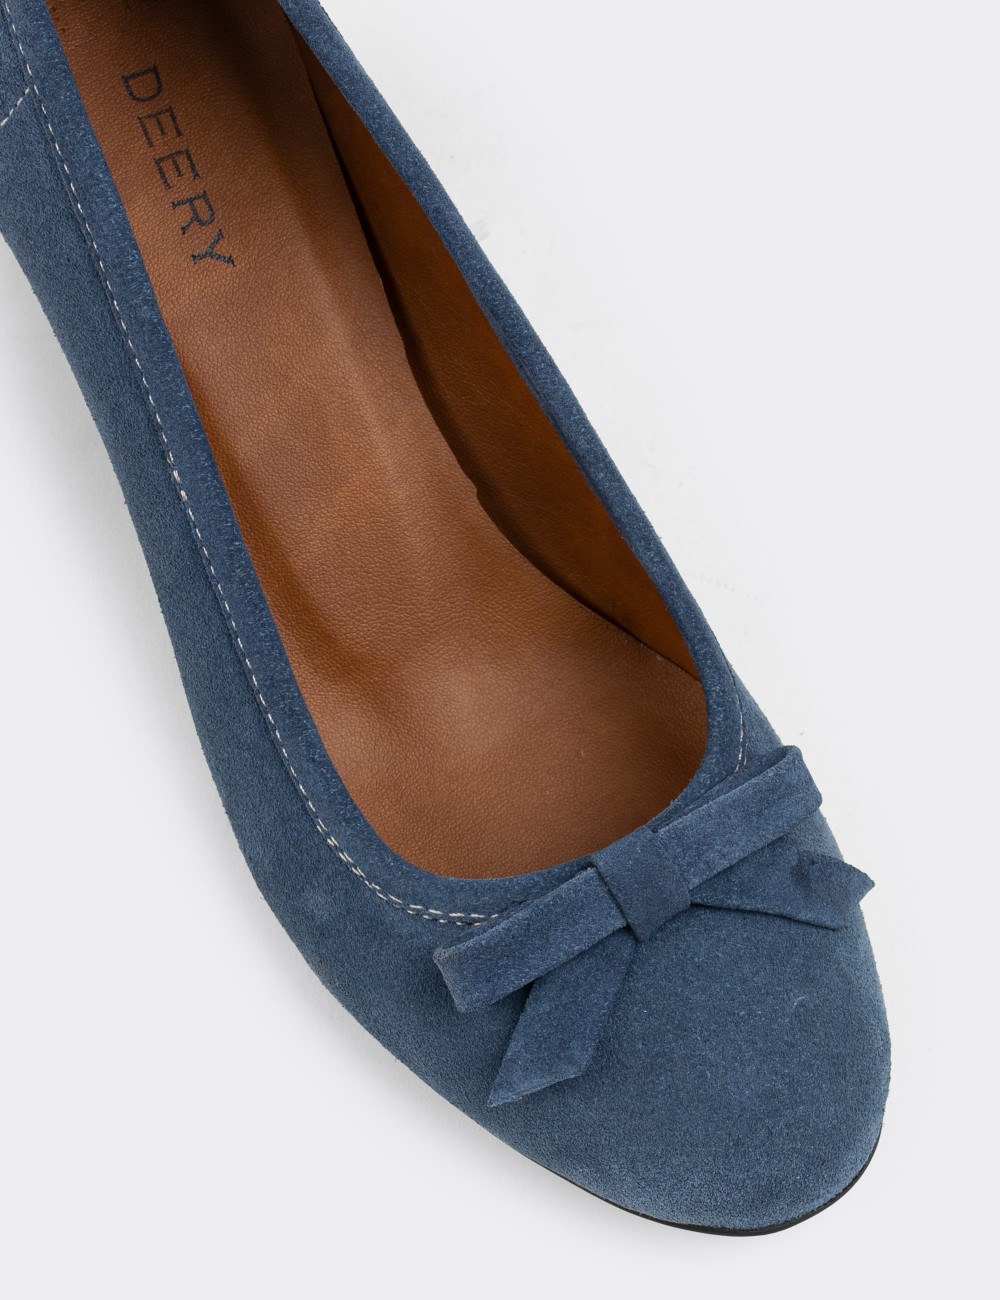 Blue Suede Leather Heel - E1471ZMVIC01